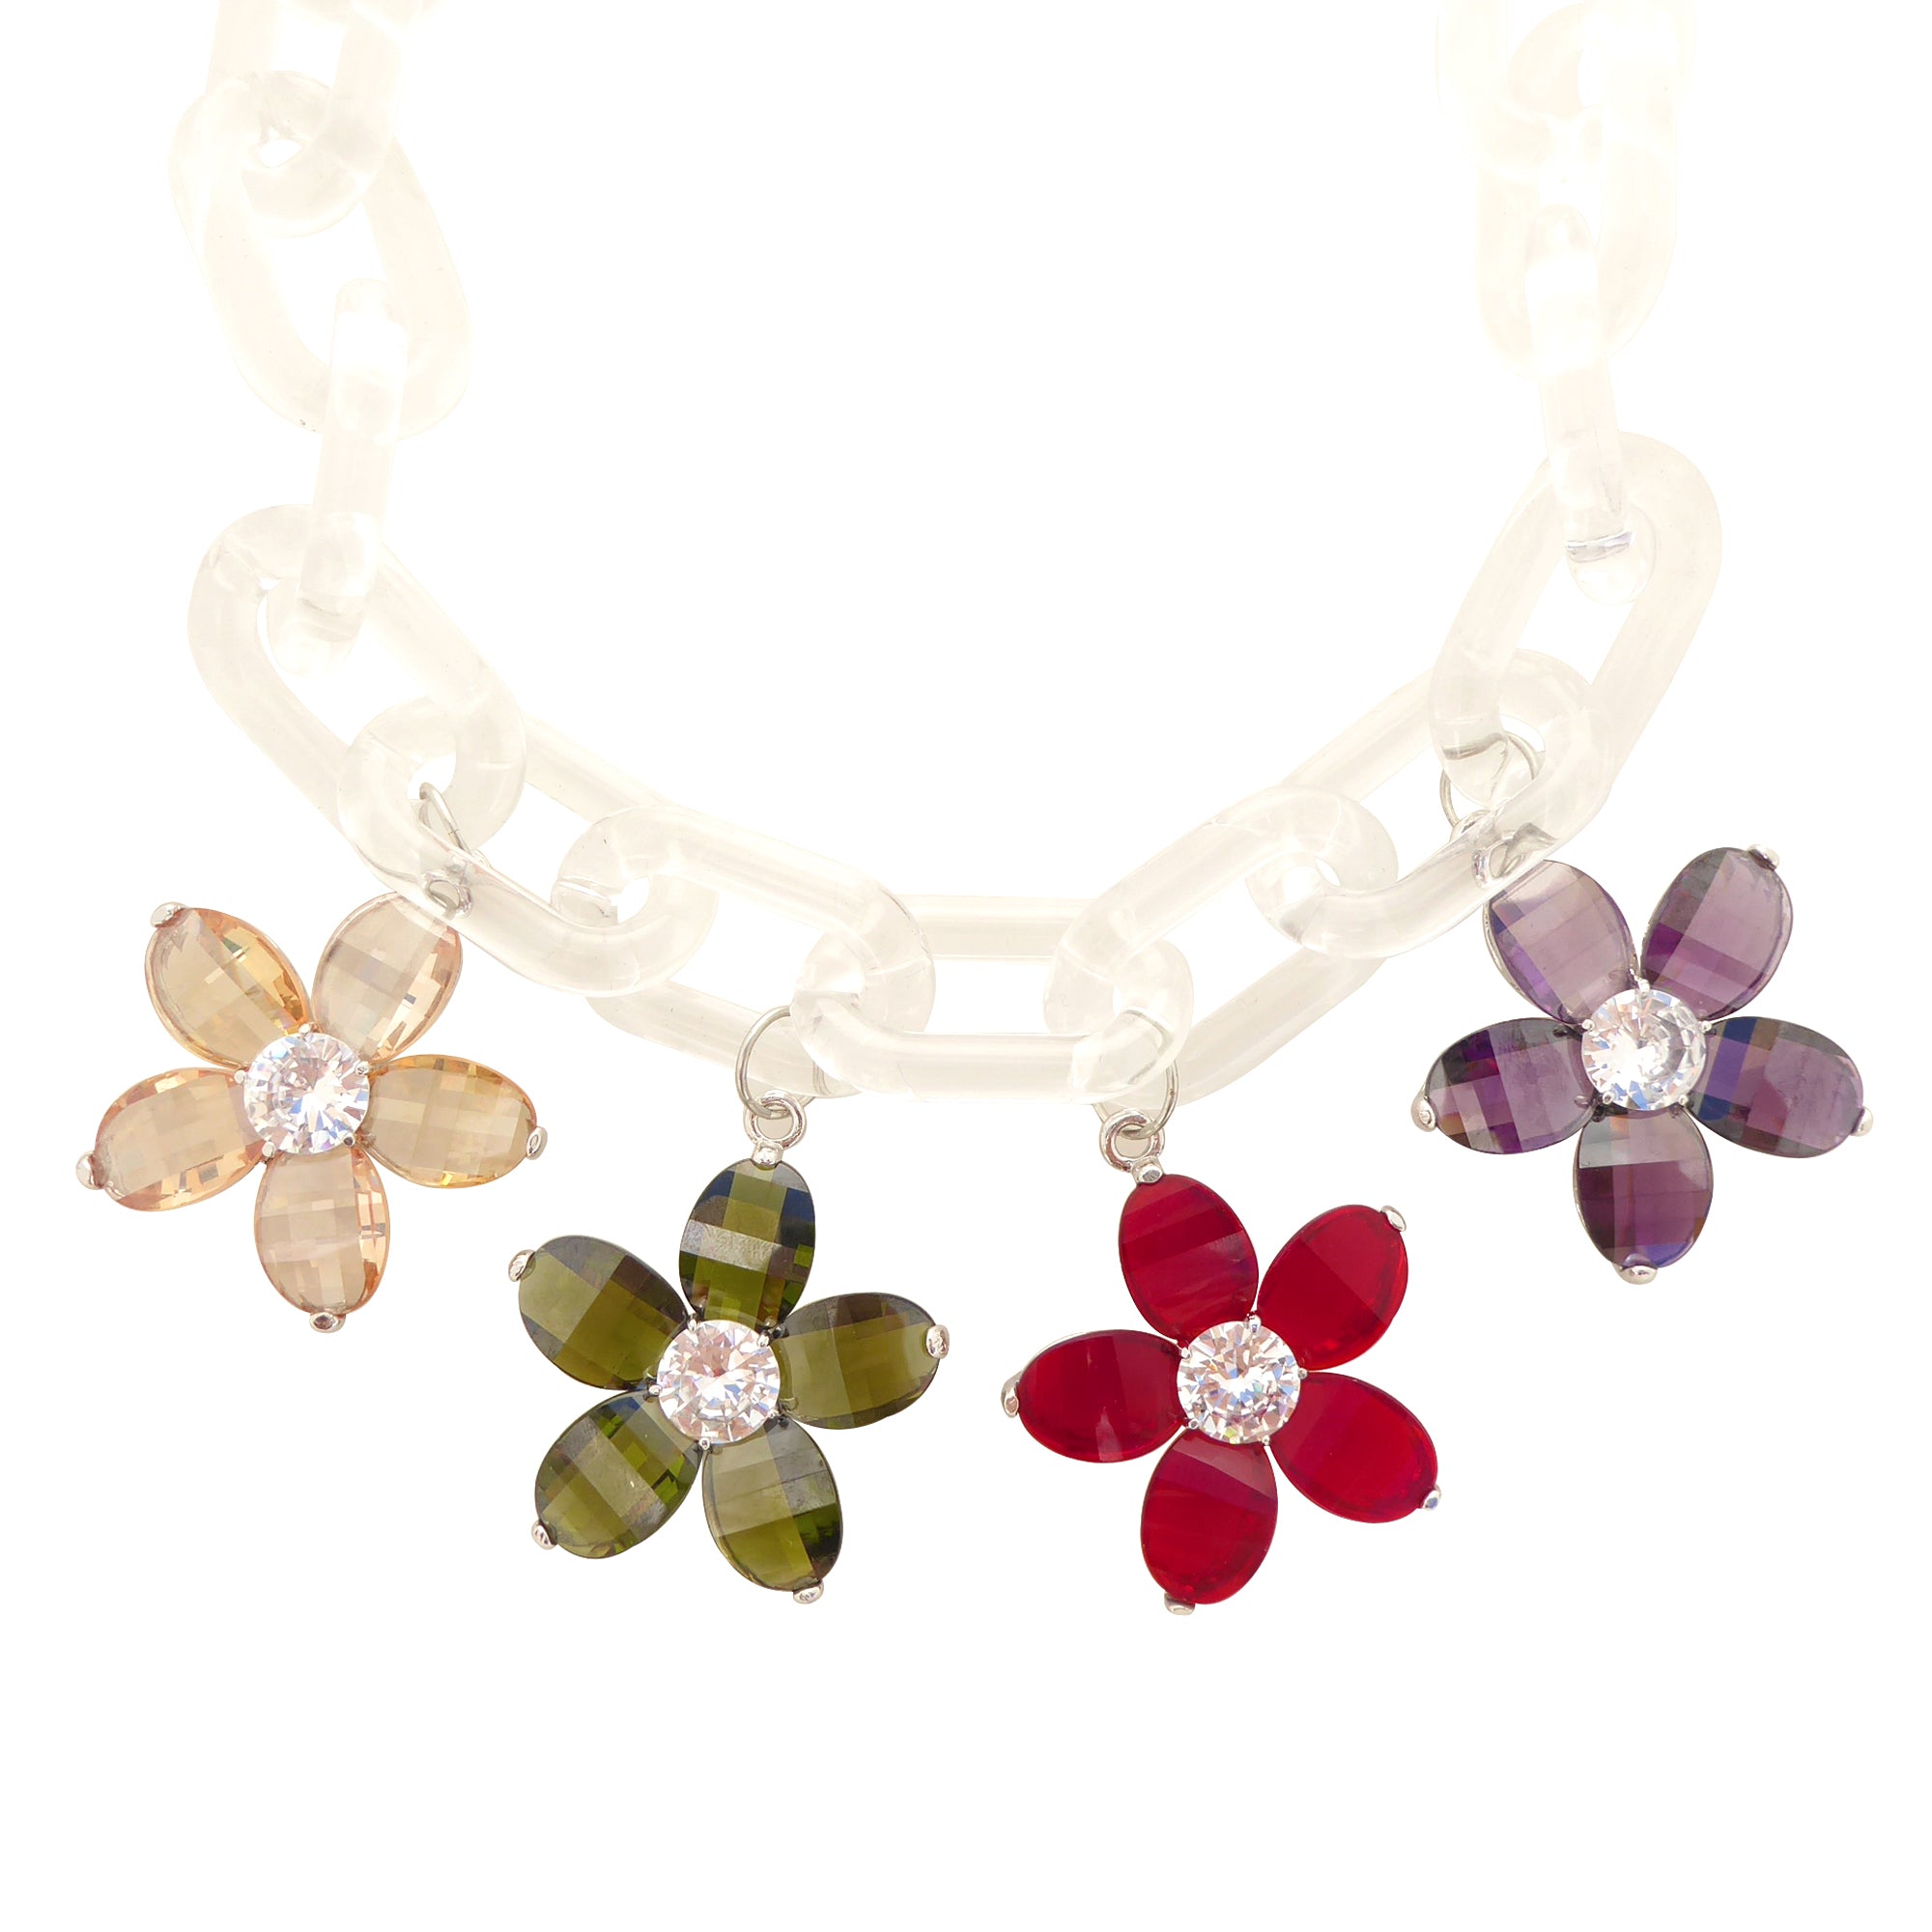 Printemps colorful floral clear chain necklace by Jenny Dayco 1 